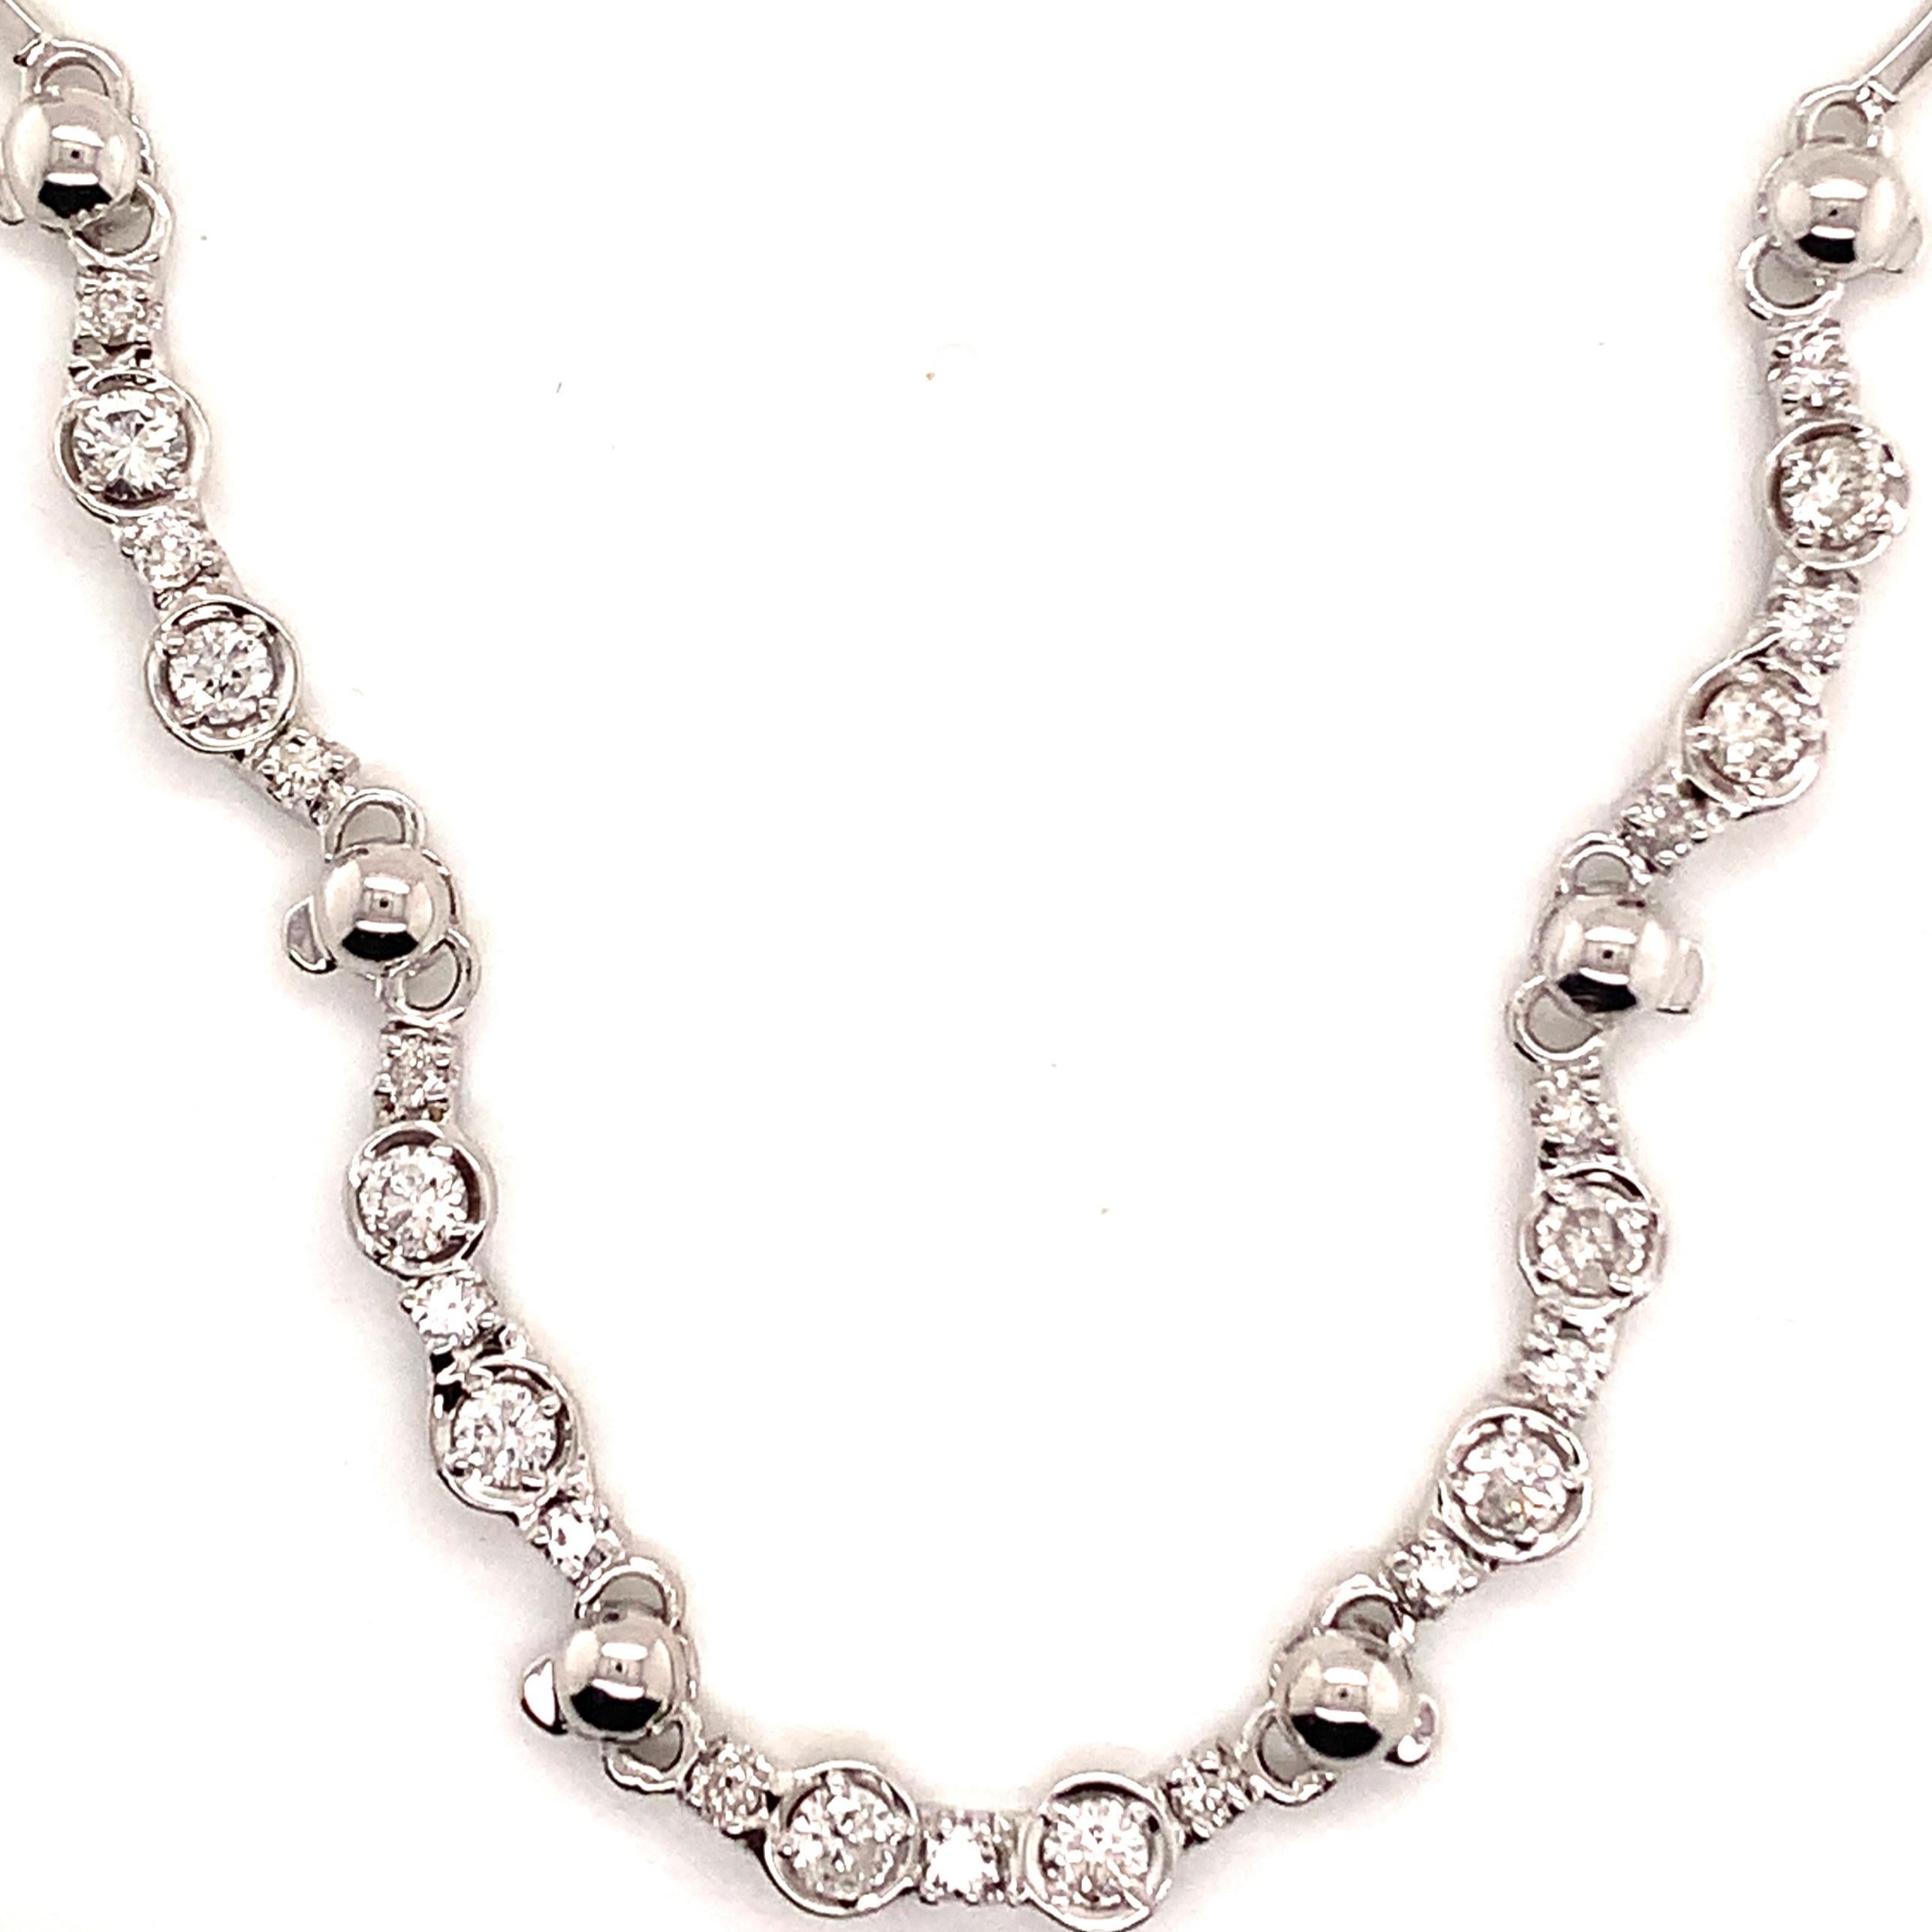 Natural Finely Faceted Quality Diamond Necklace 14k Gold 1.5 TCW 16.50 inches Certified $4,950 822590

This is a Unique Custom Made Glamorous Piece of Jewelry!

Nothing says, “I Love you” more than Diamonds and Pearls!

This Diamond necklace has